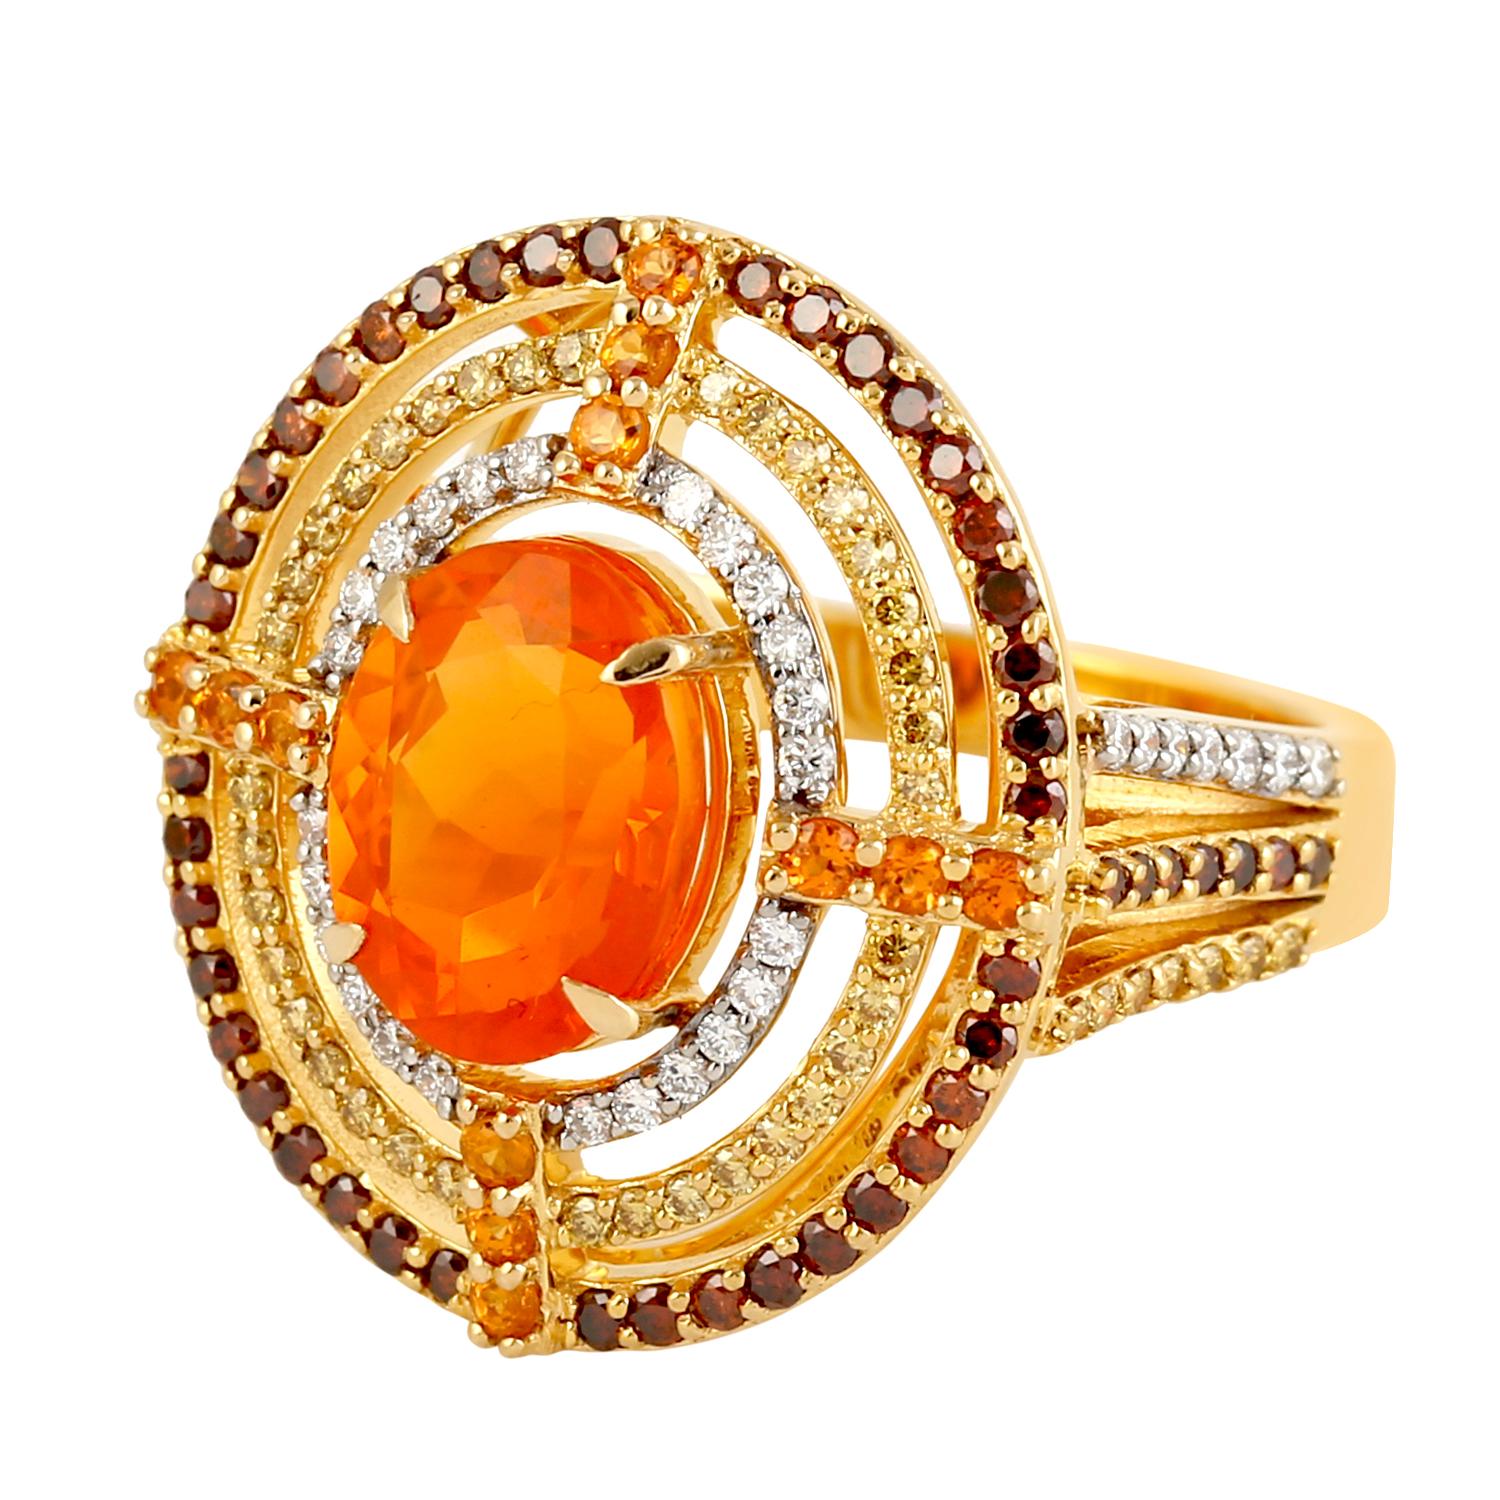 Mixed Cut Fire Opal Cocktail Ring Surrounded By Mandarin Garnet & Diamonds In 18k Gold For Sale